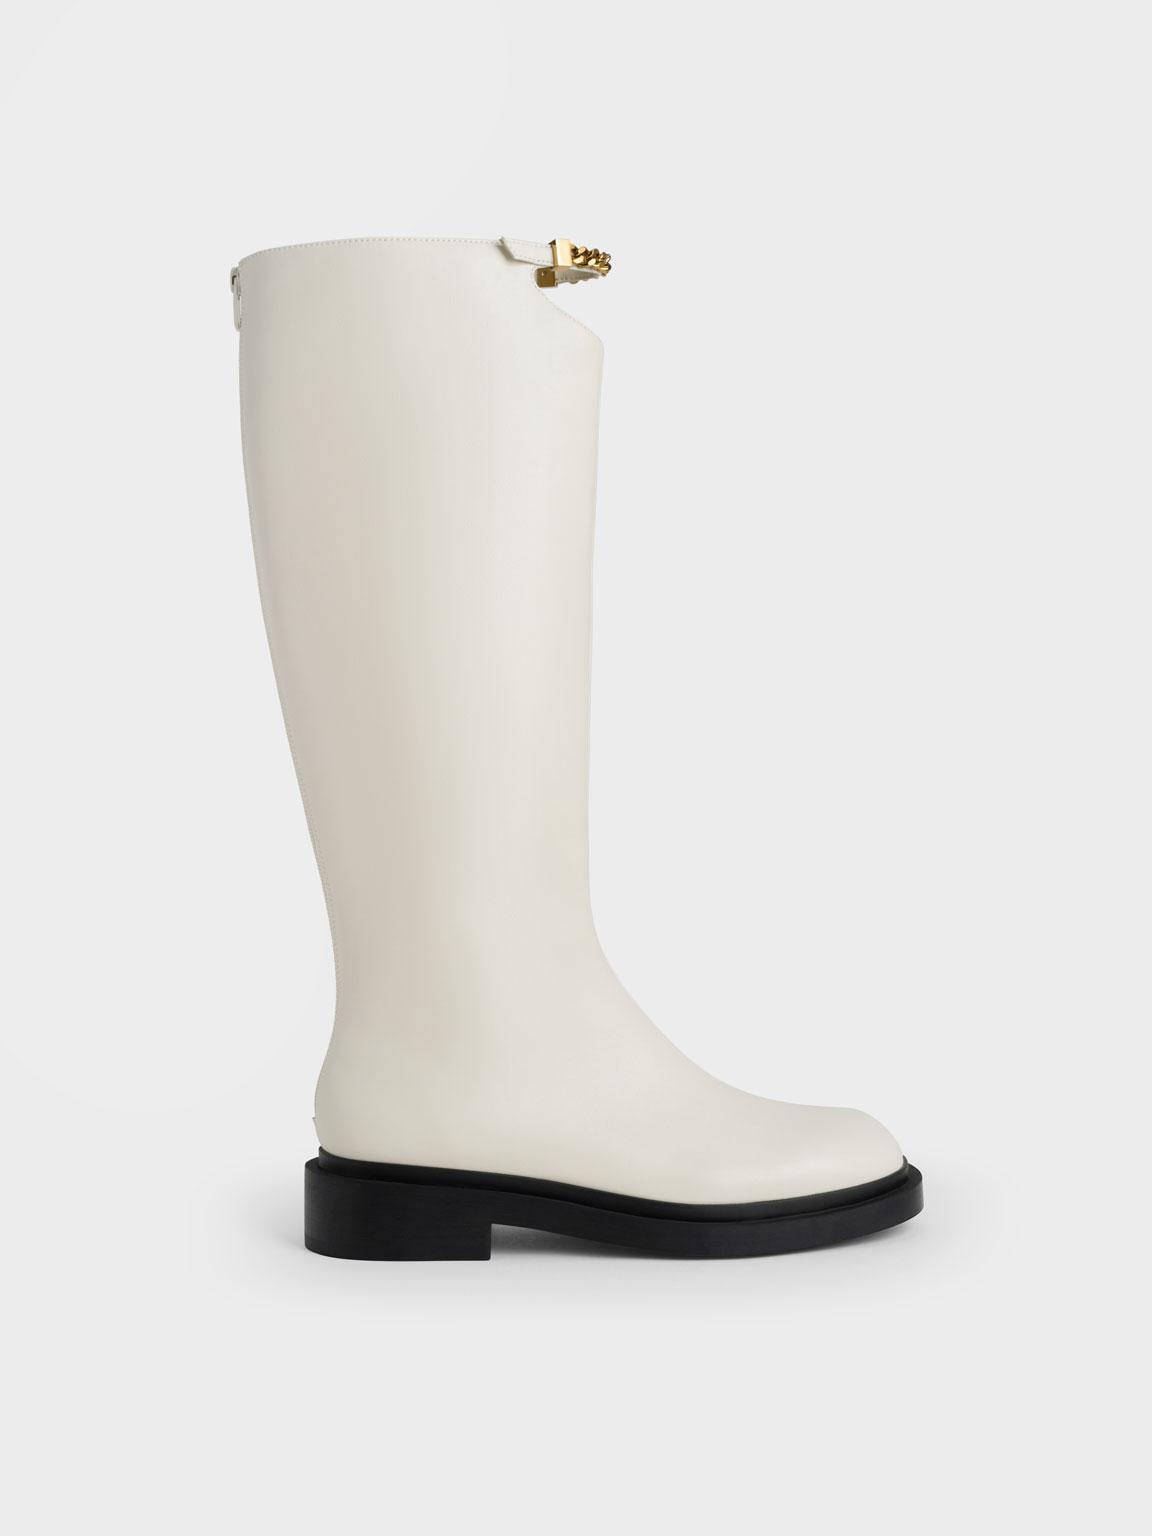 Charles & Keith Chain-link Cut-out Knee-high Boots in White | Lyst